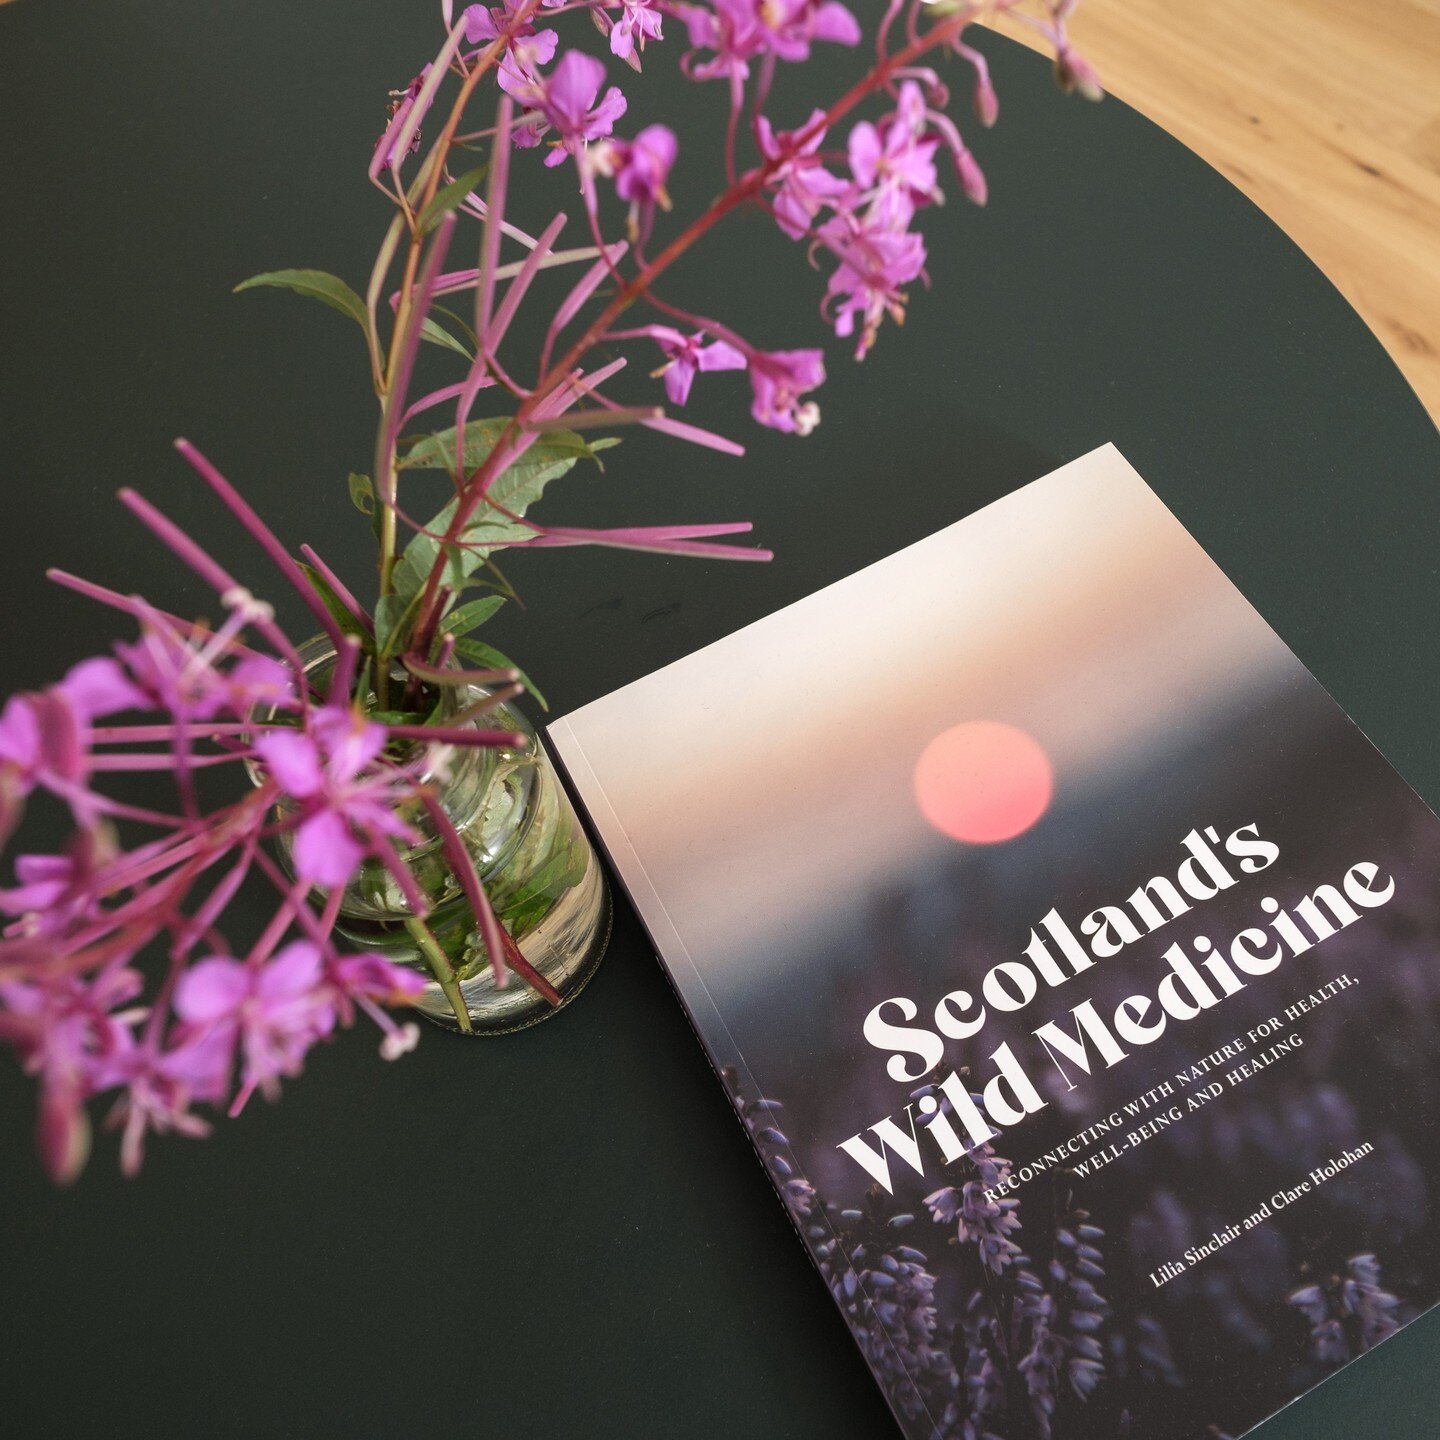 A gorgeous new addition to the Taigh Whin Bothy library. This deeply researched and stunningly beautiful book from @heal_scotland takes you through the plants you can forage, and recipes and medicines you can make in every month of the calendar year.